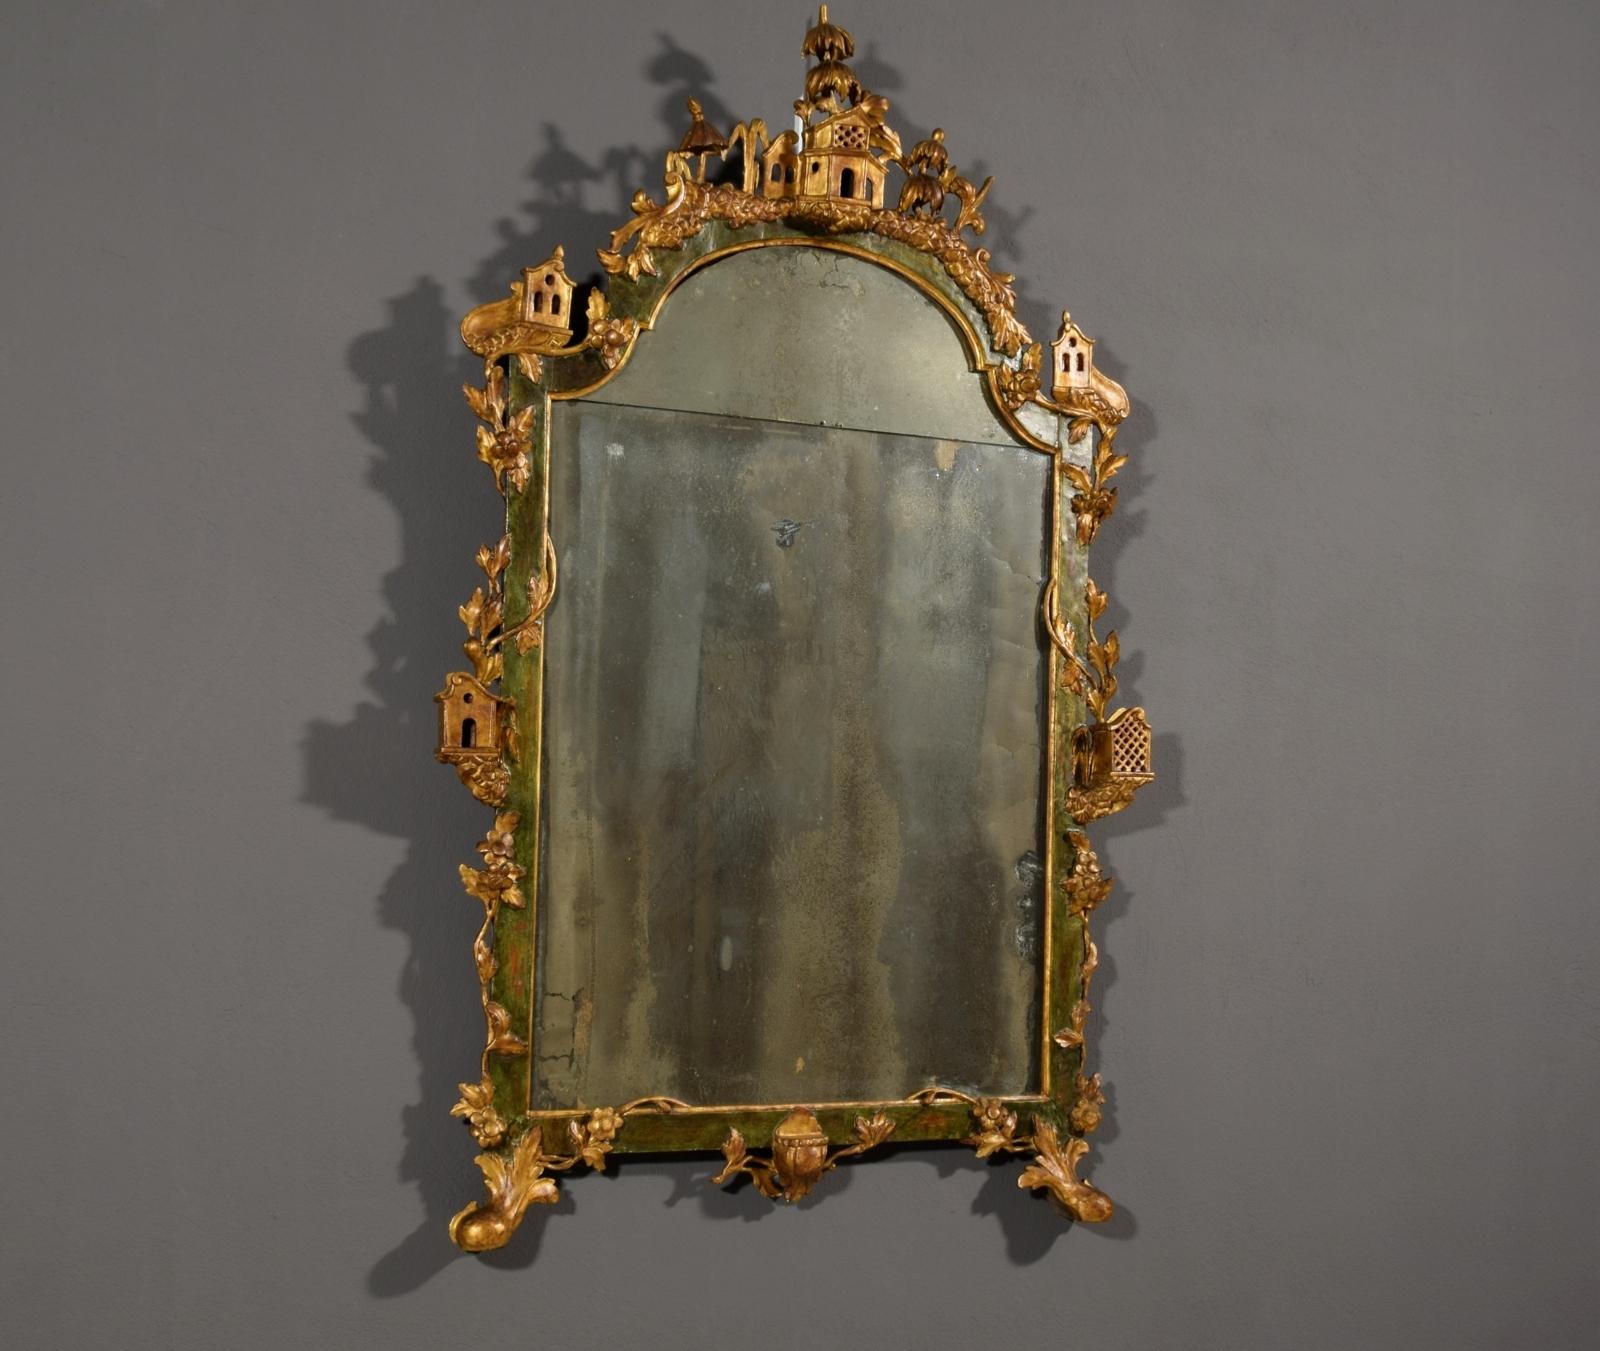 19th century, Italian Venetian gilded lacquered wood mirror

Particular mirror in Louis XV style, made in Venice (Italy) in the 19th century.
The mirror consists of a curious wooden frame richly carved, lacquered and gilded. The frame is